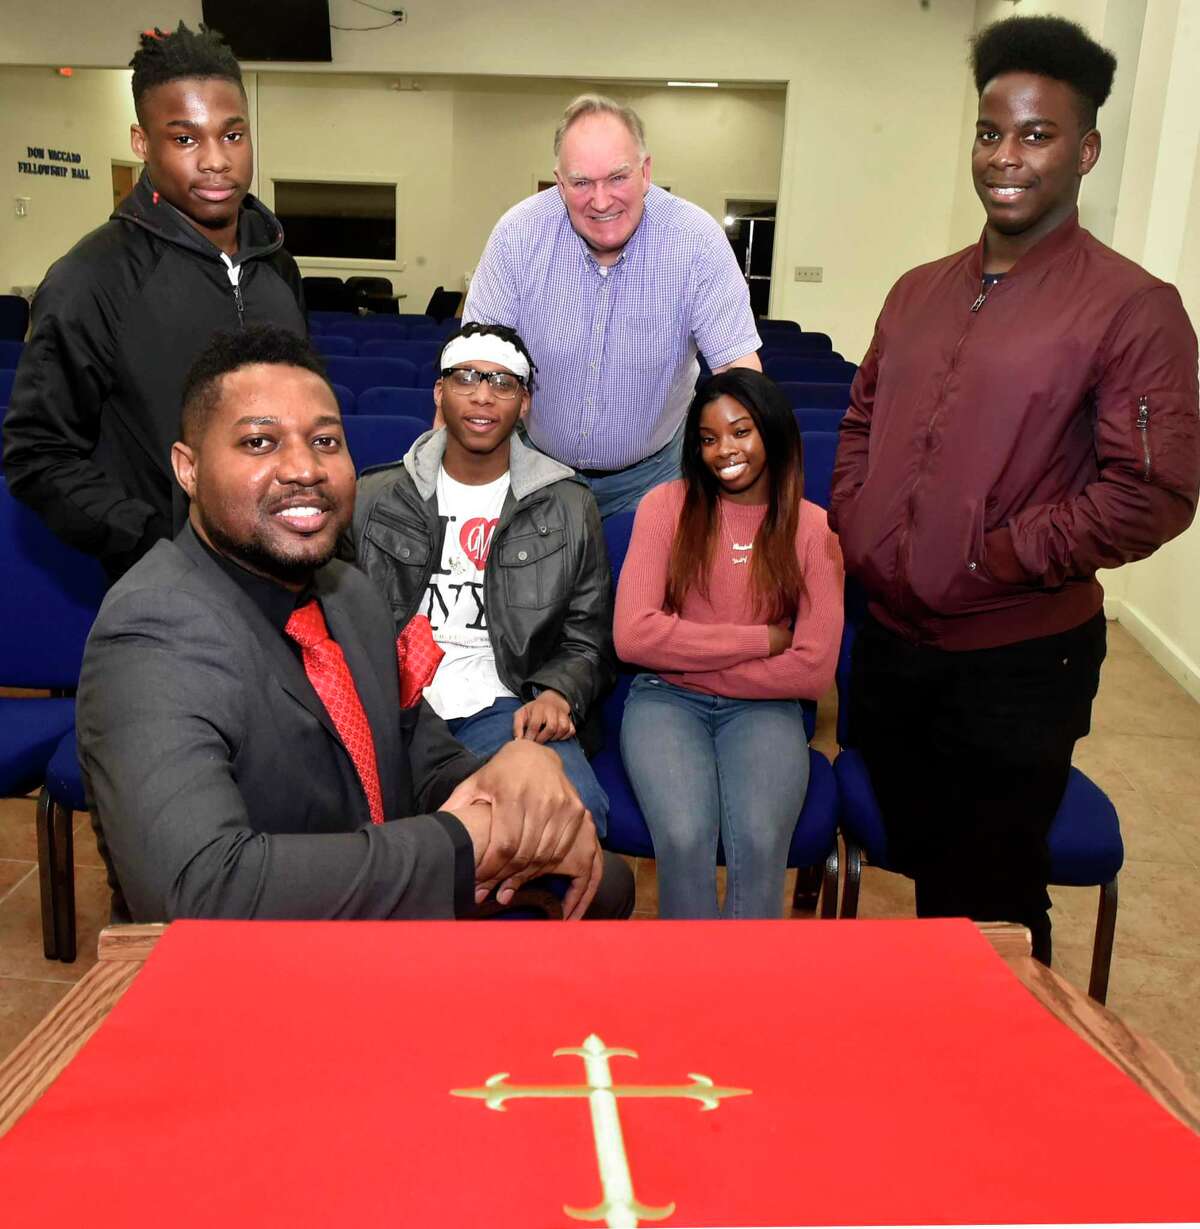 Reverend Herron Gaston, Yale Divinity School Associate Director of Admissions and Recruitment and Senior Pastor at Summerfield United Methodist Church in Bridgeport, sitting front, who organized Youth With A Purpose, sitting with participants.